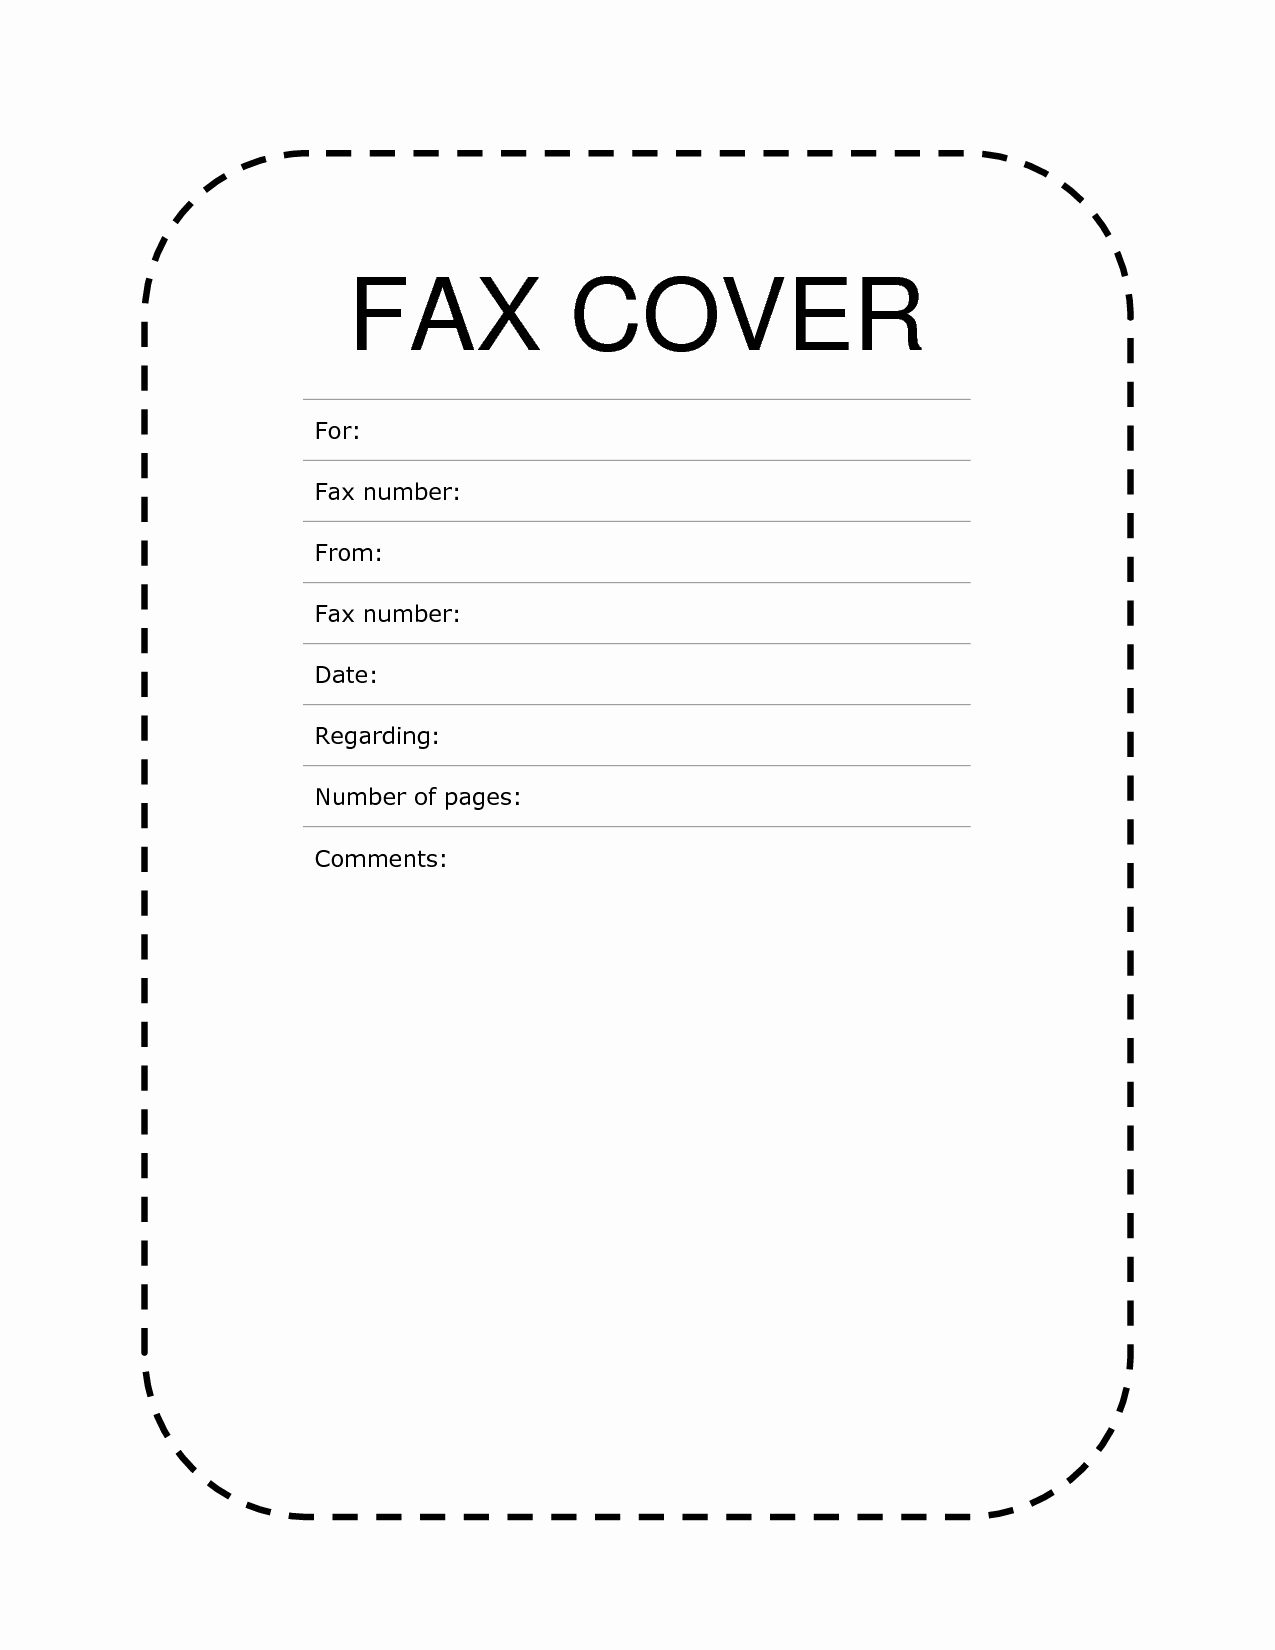 Fax Cover Sheet Template Free Luxury [free] Fax Cover Sheet Template